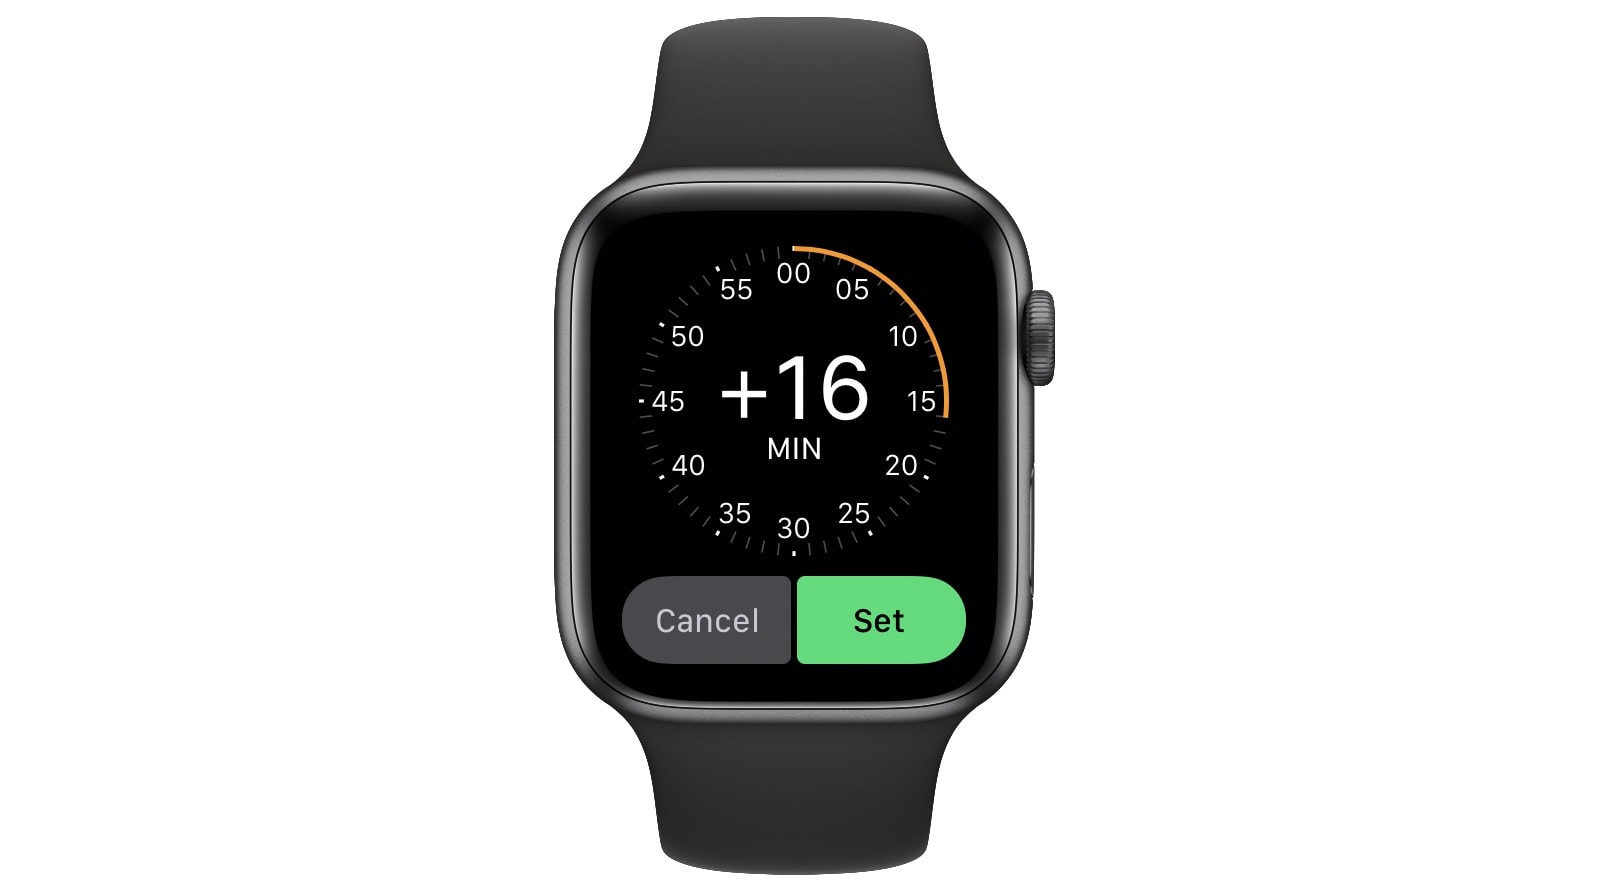 You can decrease the accuracy of your Apple Watch by up to 59 minutes.